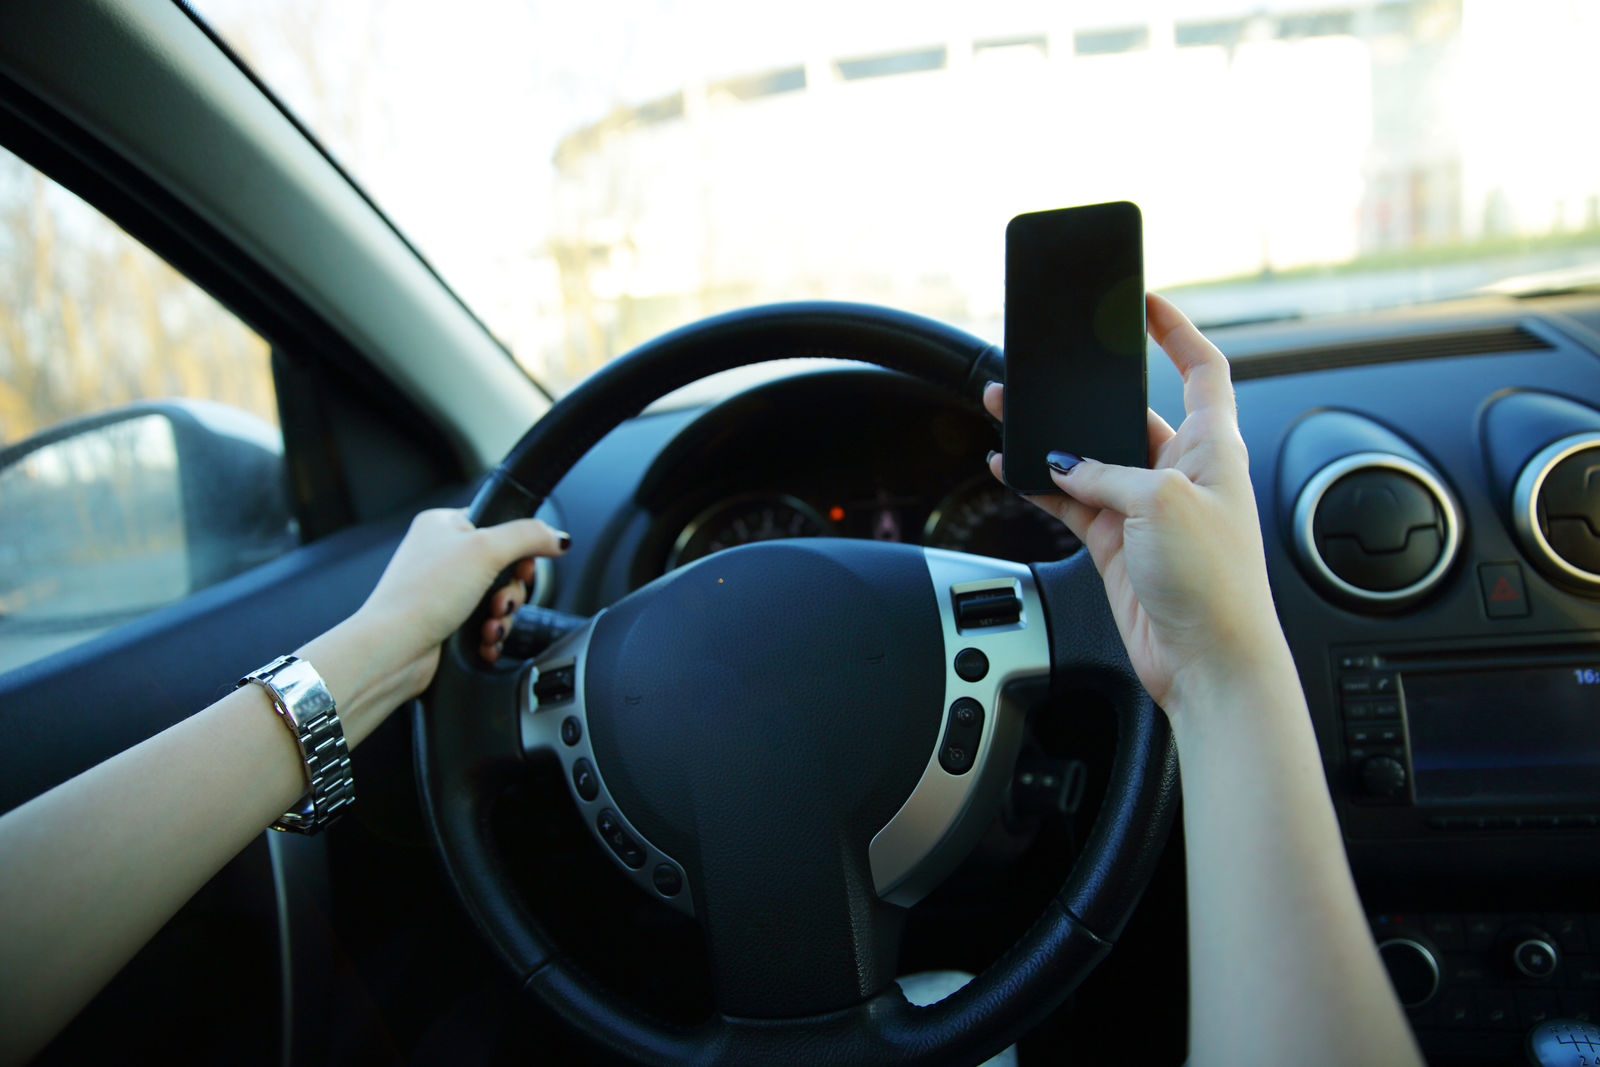 Can car insurance companies check phone records?